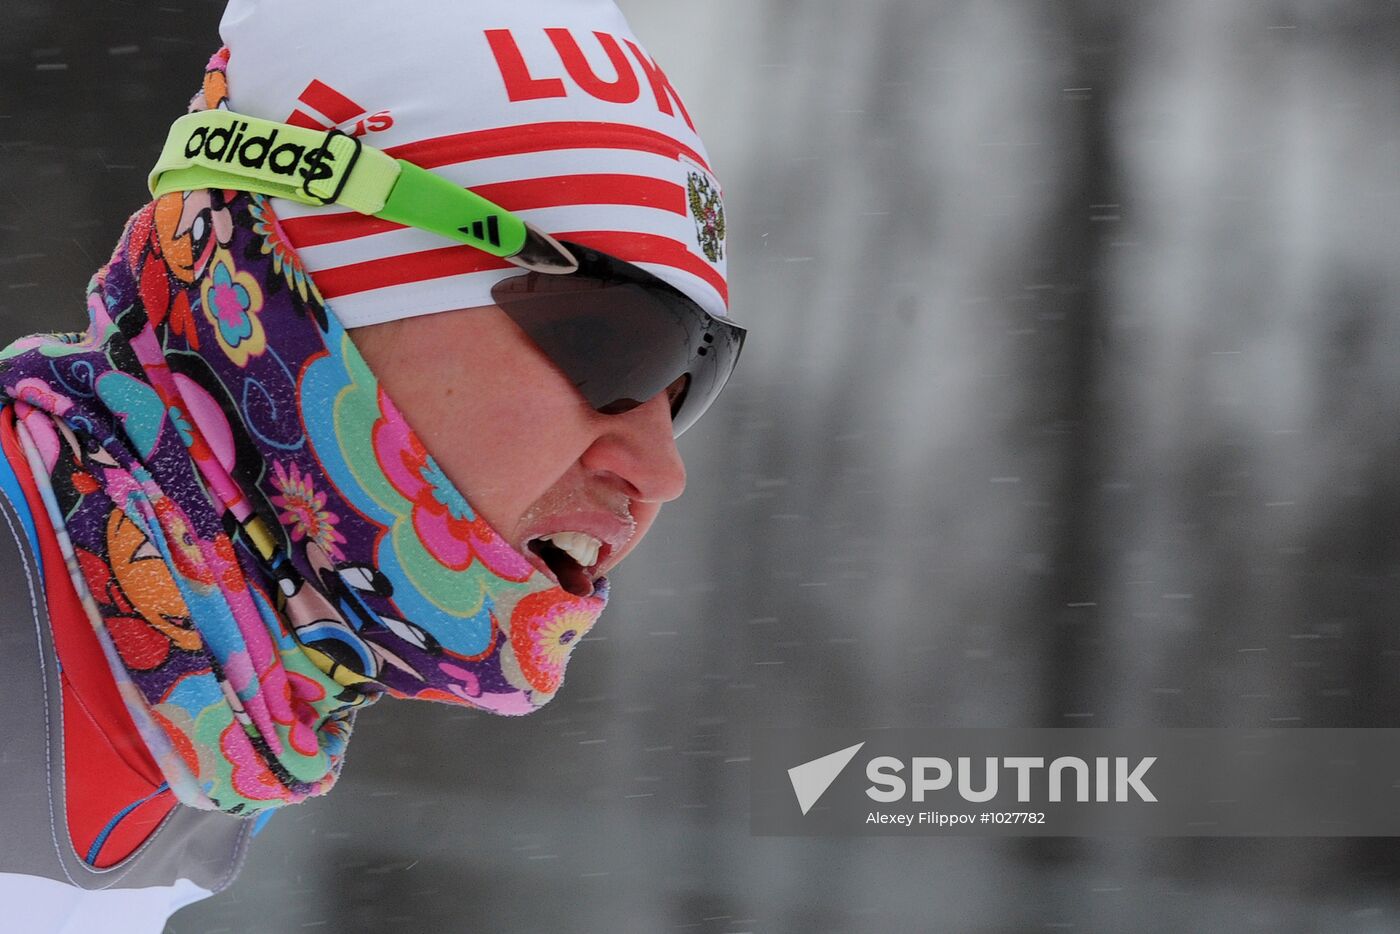 FIS Cross-Country Sprint World Cup